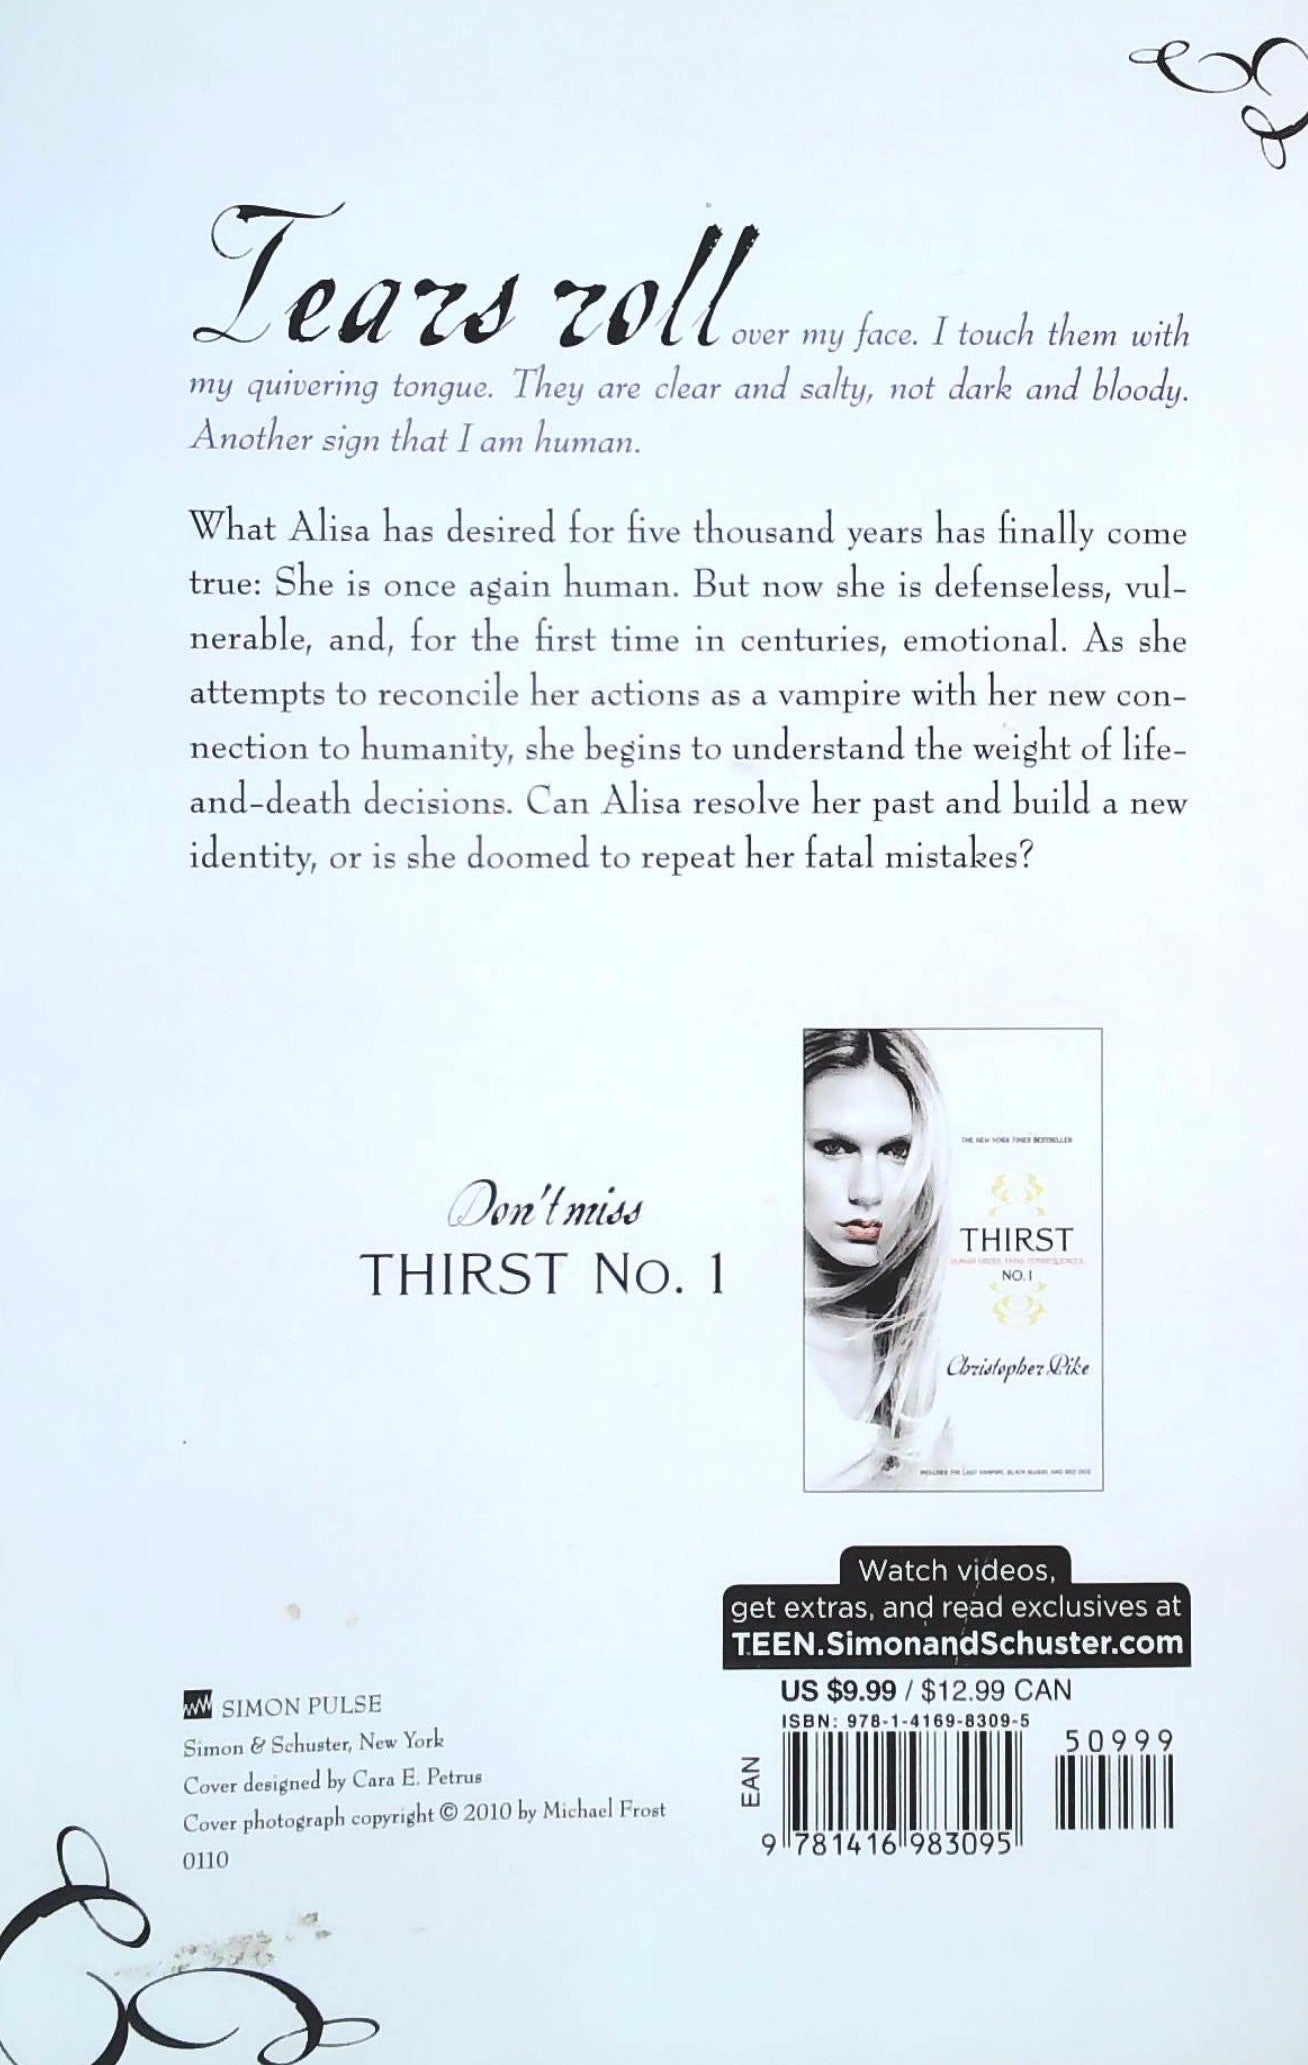 Thirst # 2 : Deepest Desires. Instant Remorse. (Christopher Pike)